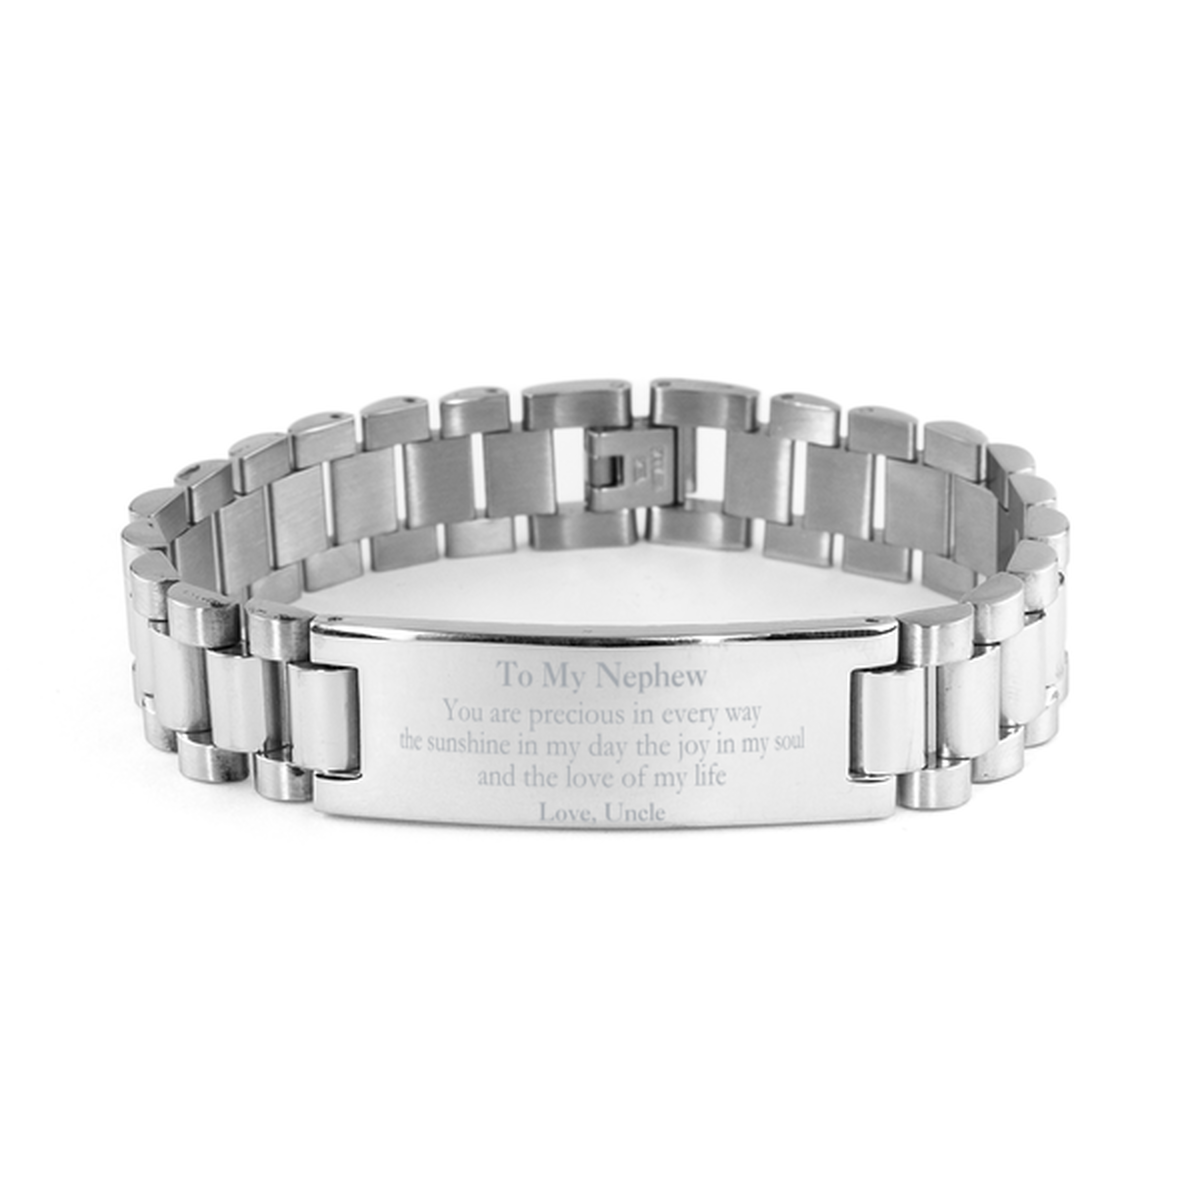 Graduation Gifts for Nephew Ladder Stainless Steel Bracelet Present from Uncle, Christmas Nephew Birthday Gifts Nephew You are precious in every way the sunshine in my day. Love, Uncle